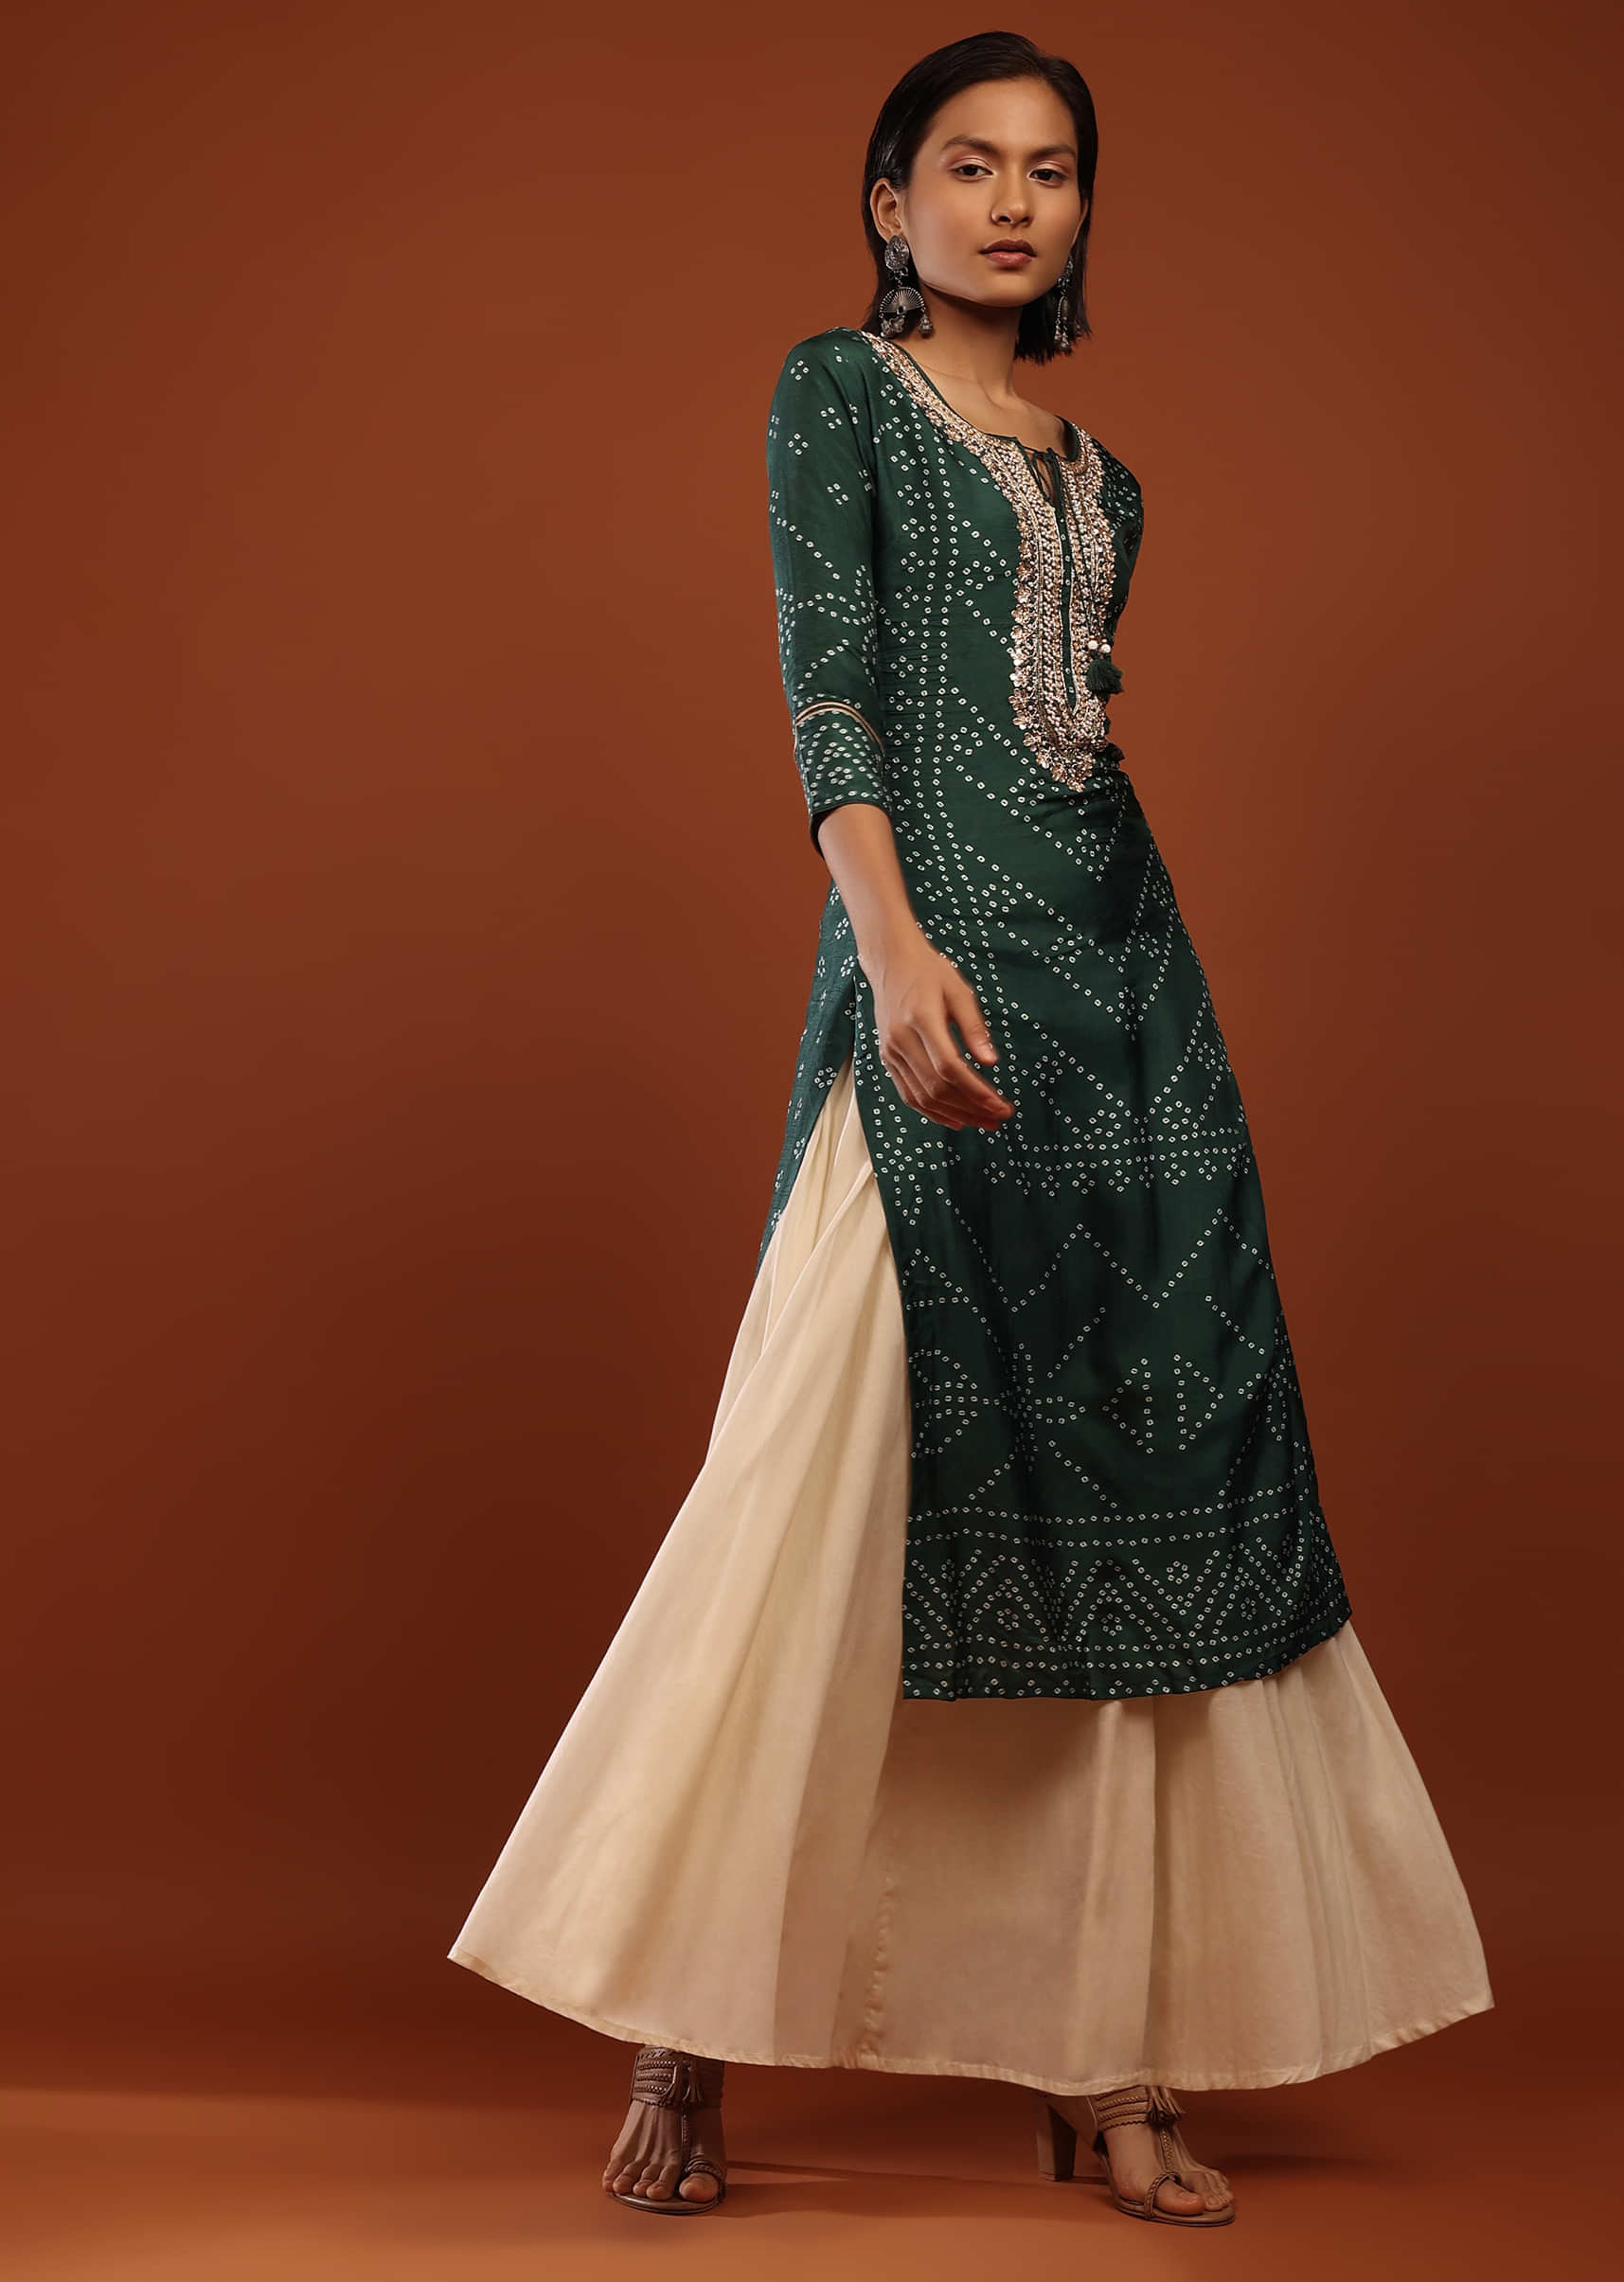 Pine Green Kurta In Cotton With Bandhani Print And Gotta Detailed Floral Neckline